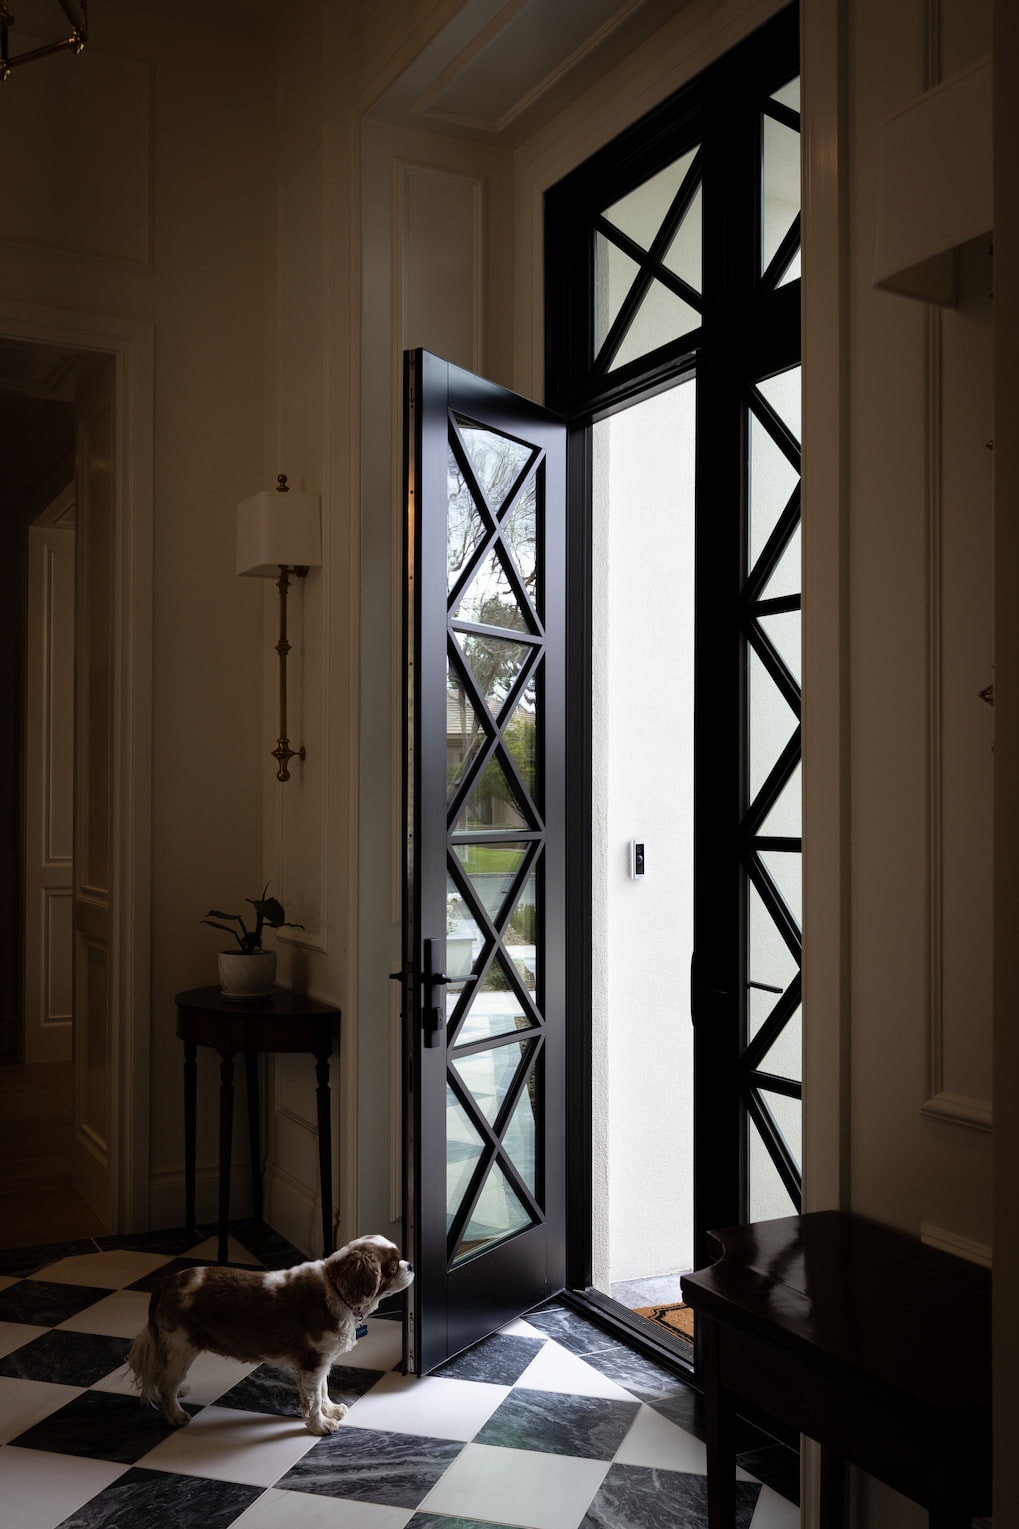 A front entryway features a custom wood front door with X-patterned grilles along with black and white tile floors.